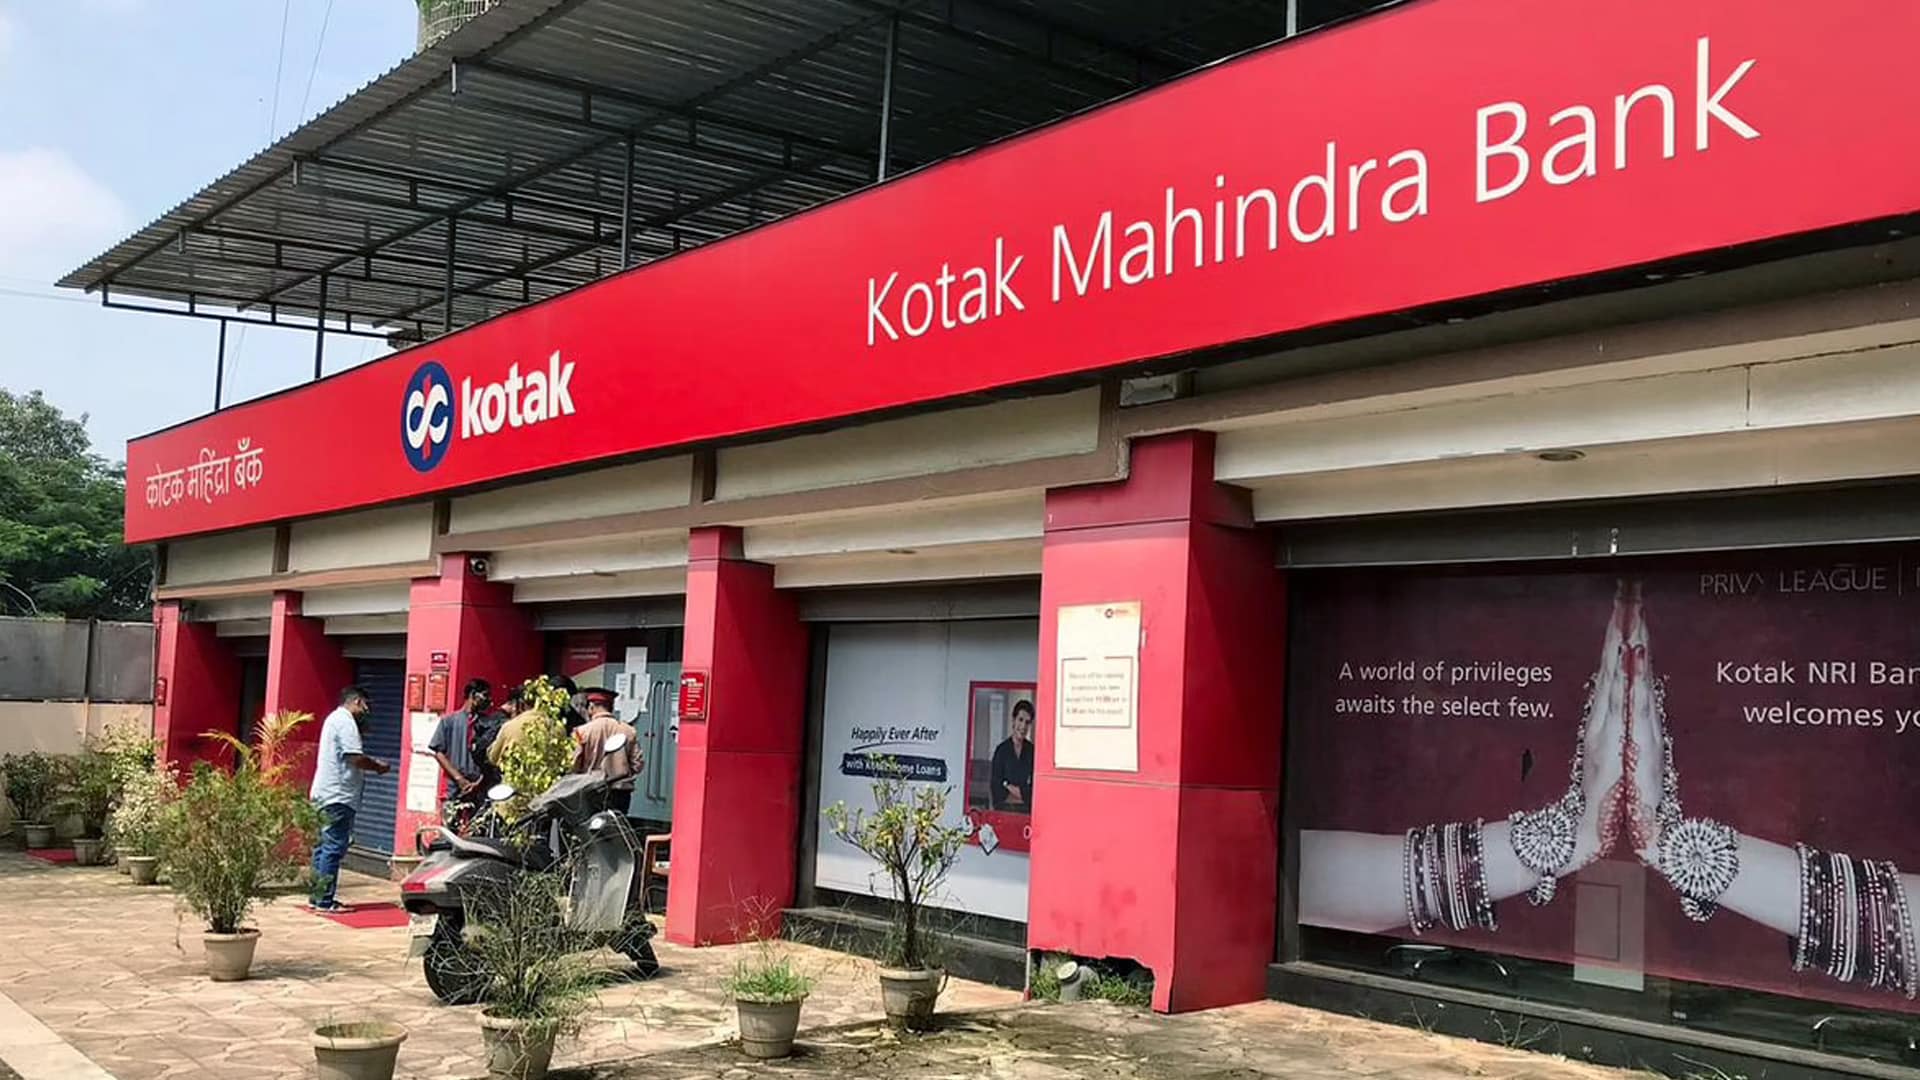 Kotak Mahindra Bank arm raises USD 1.25 bn for 2nd special situations fund